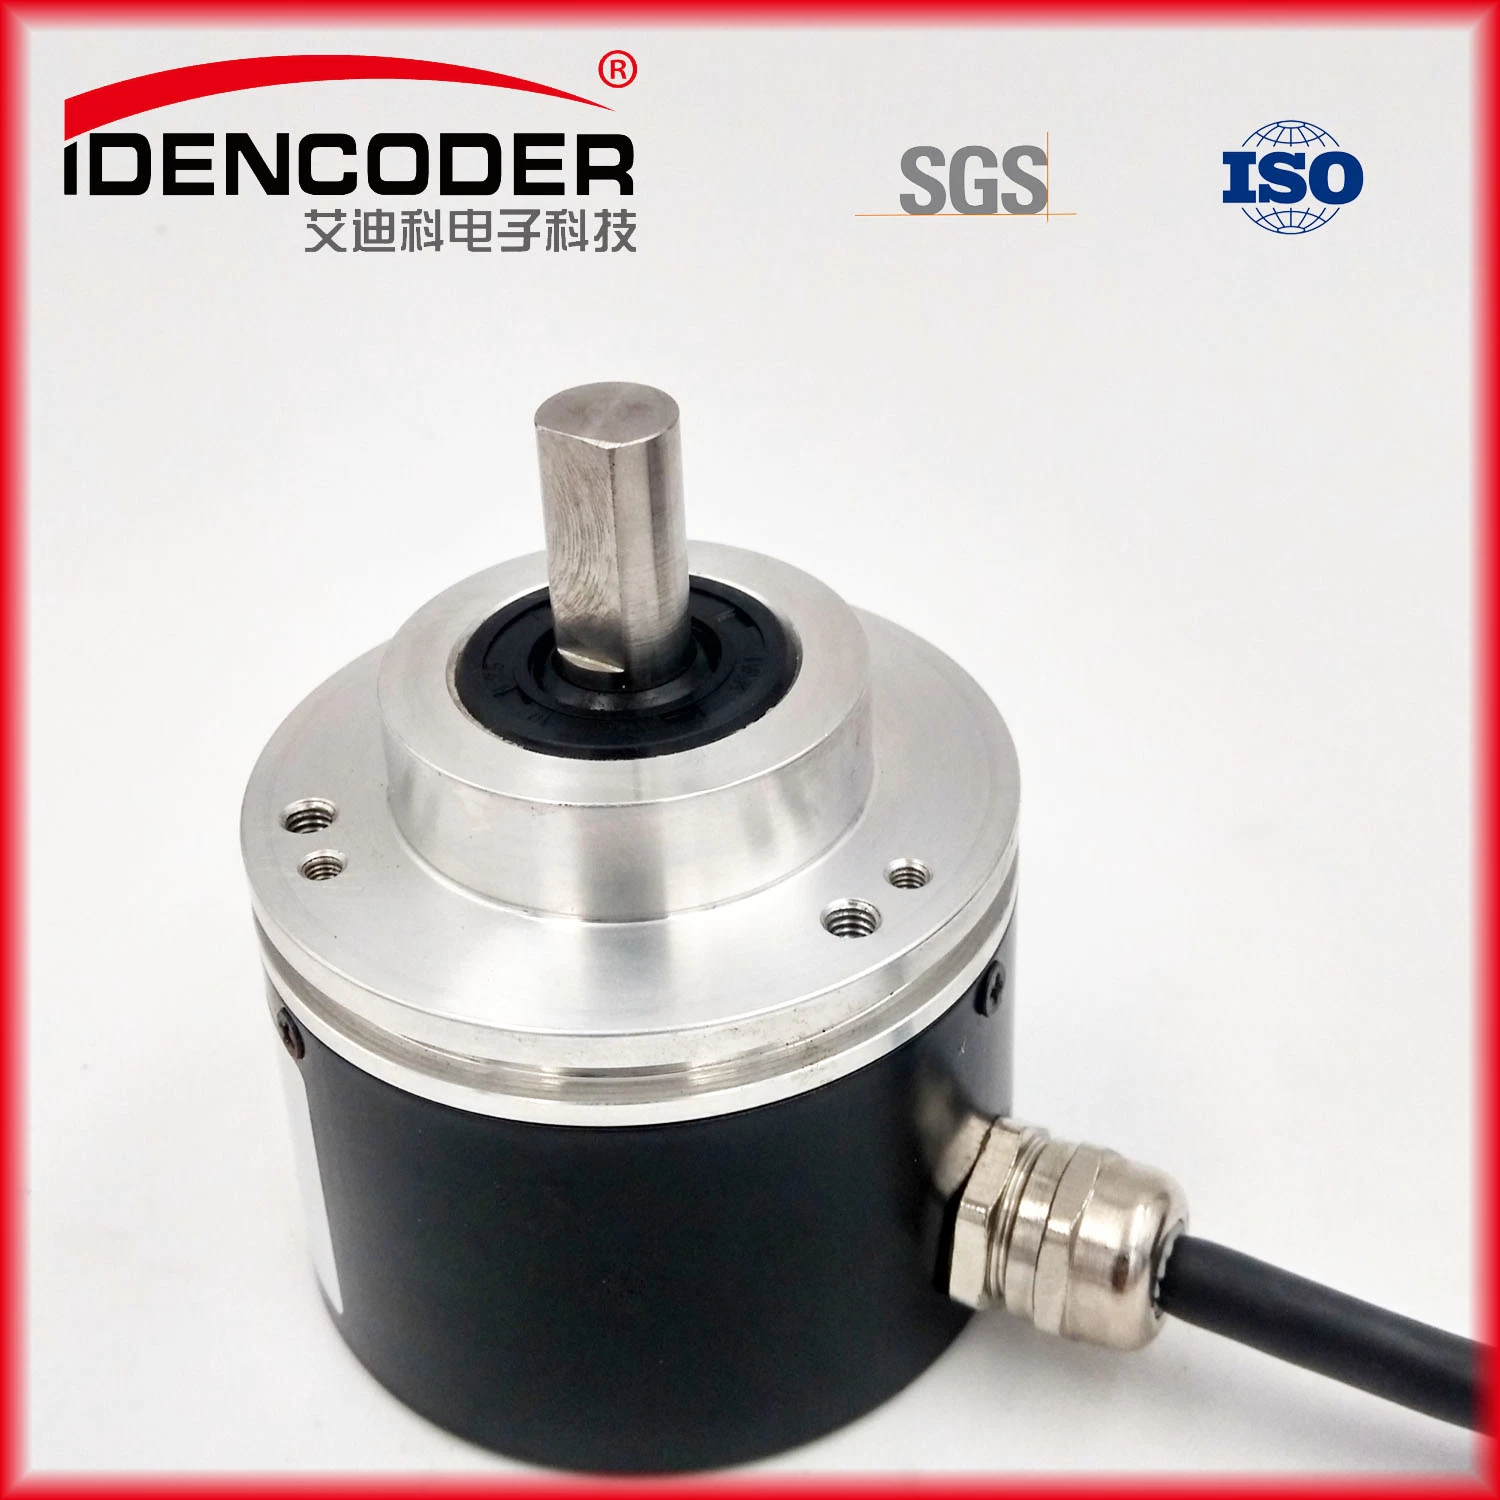 Incremental Rotary Encoder for Air Jet Loom Hot Sell in India Replace Omron E6b2 Cwe and Autonics Trd